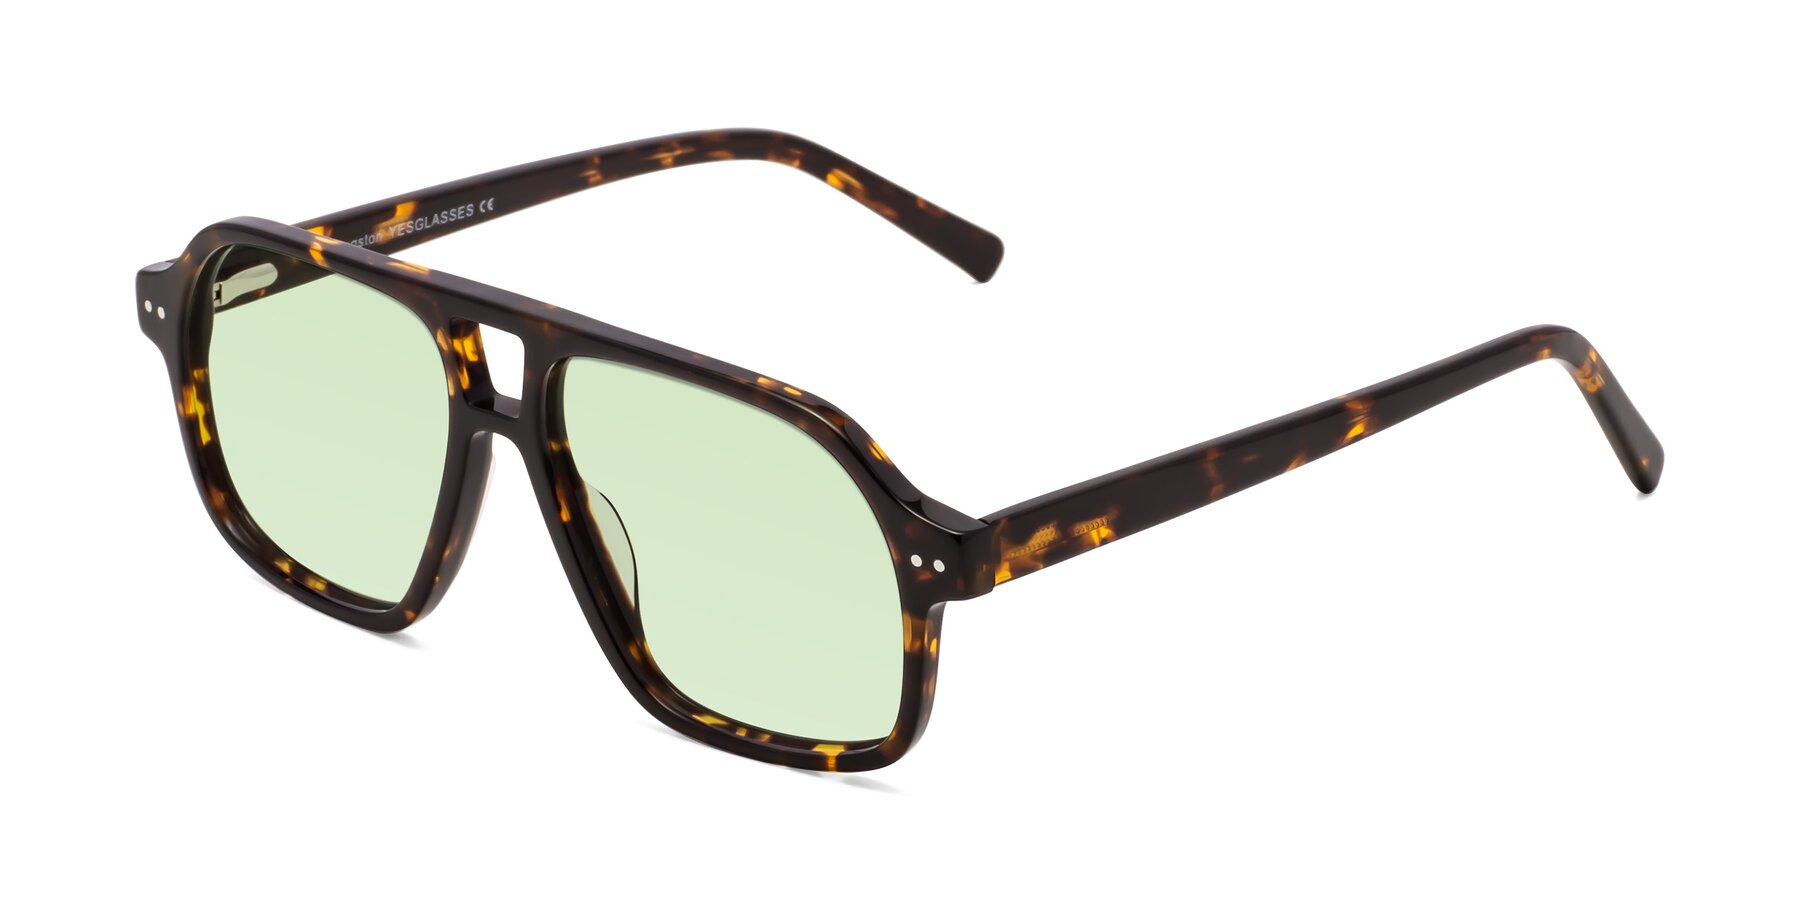 Angle of Kingston in Tortoise with Light Green Tinted Lenses